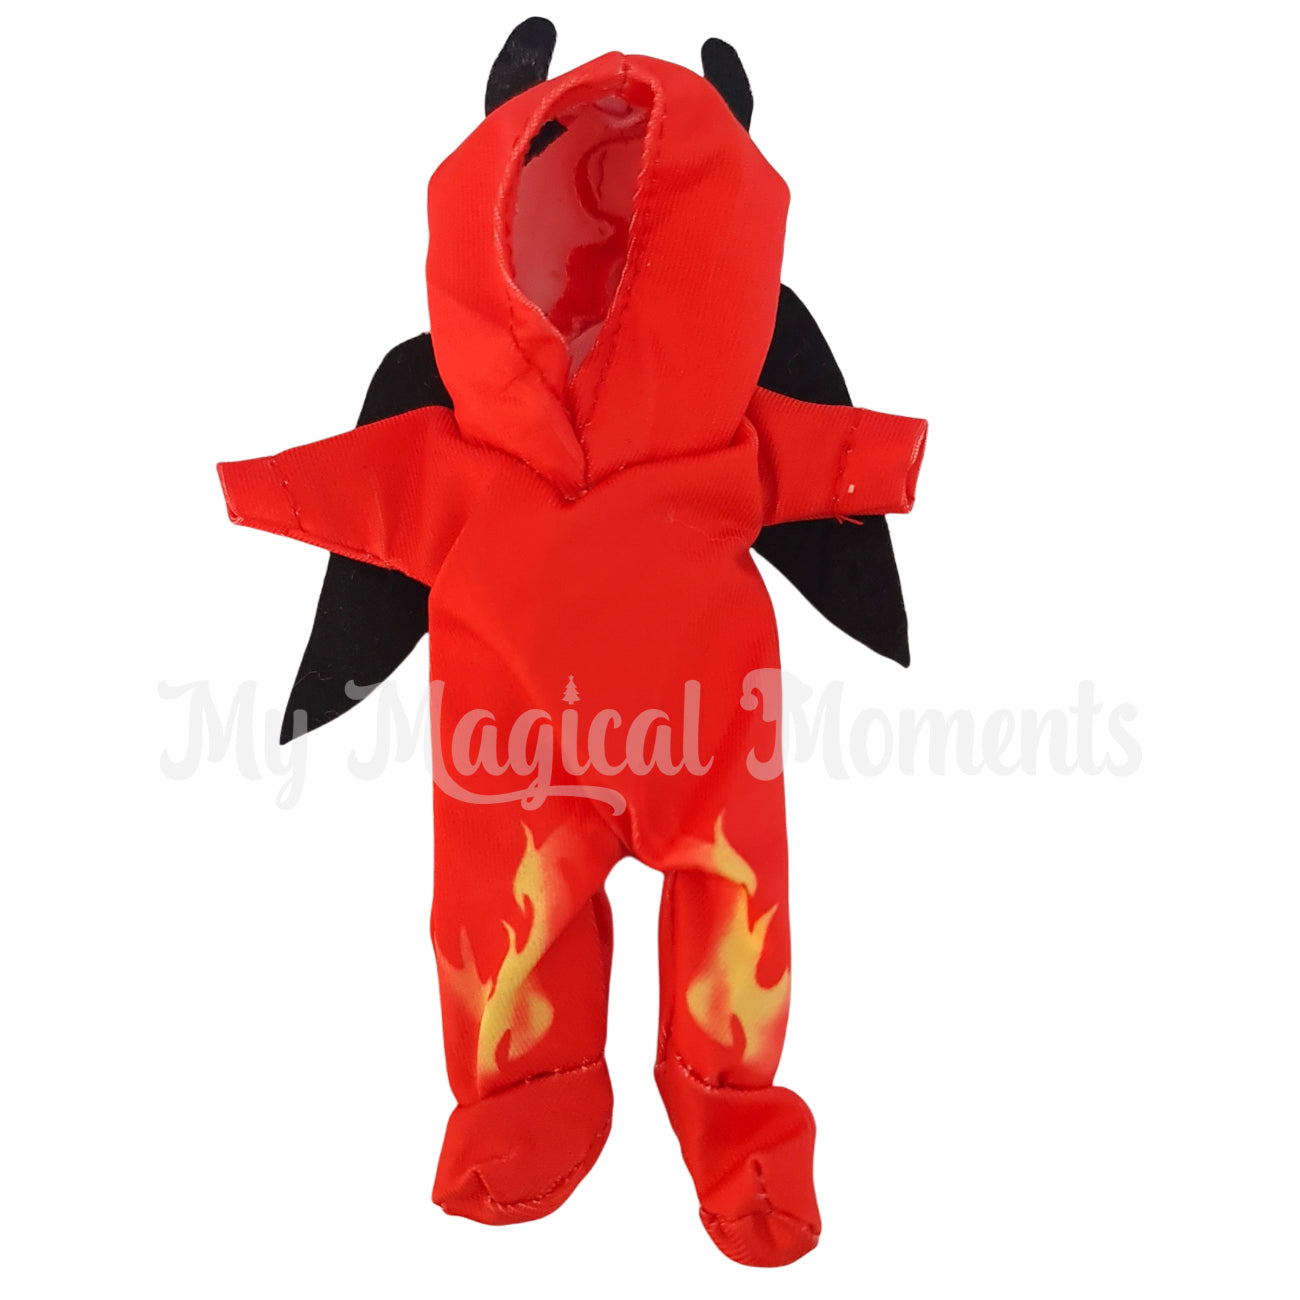 Devil elf toddler outfit with red flames